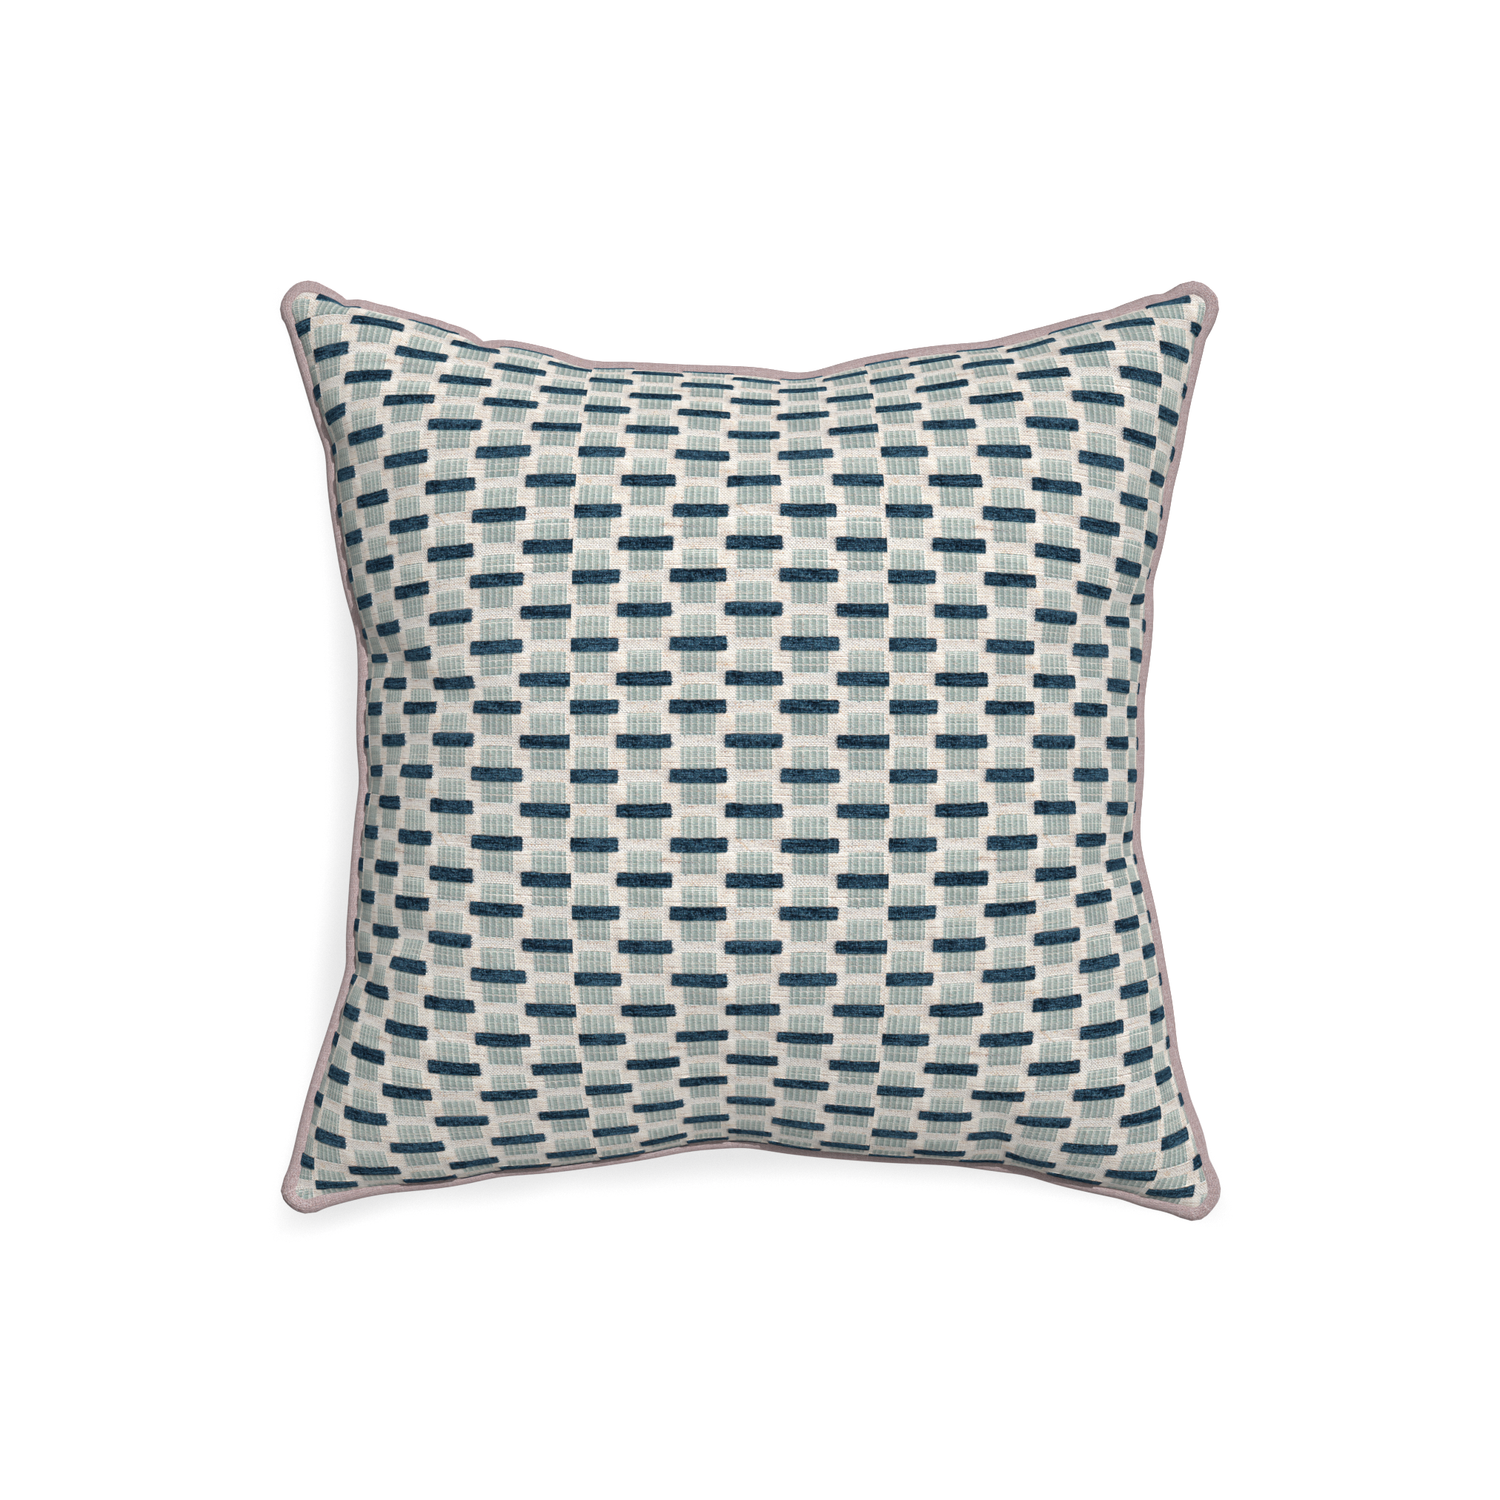 20-square willow amalfi custom blue geometric chenillepillow with orchid piping on white background